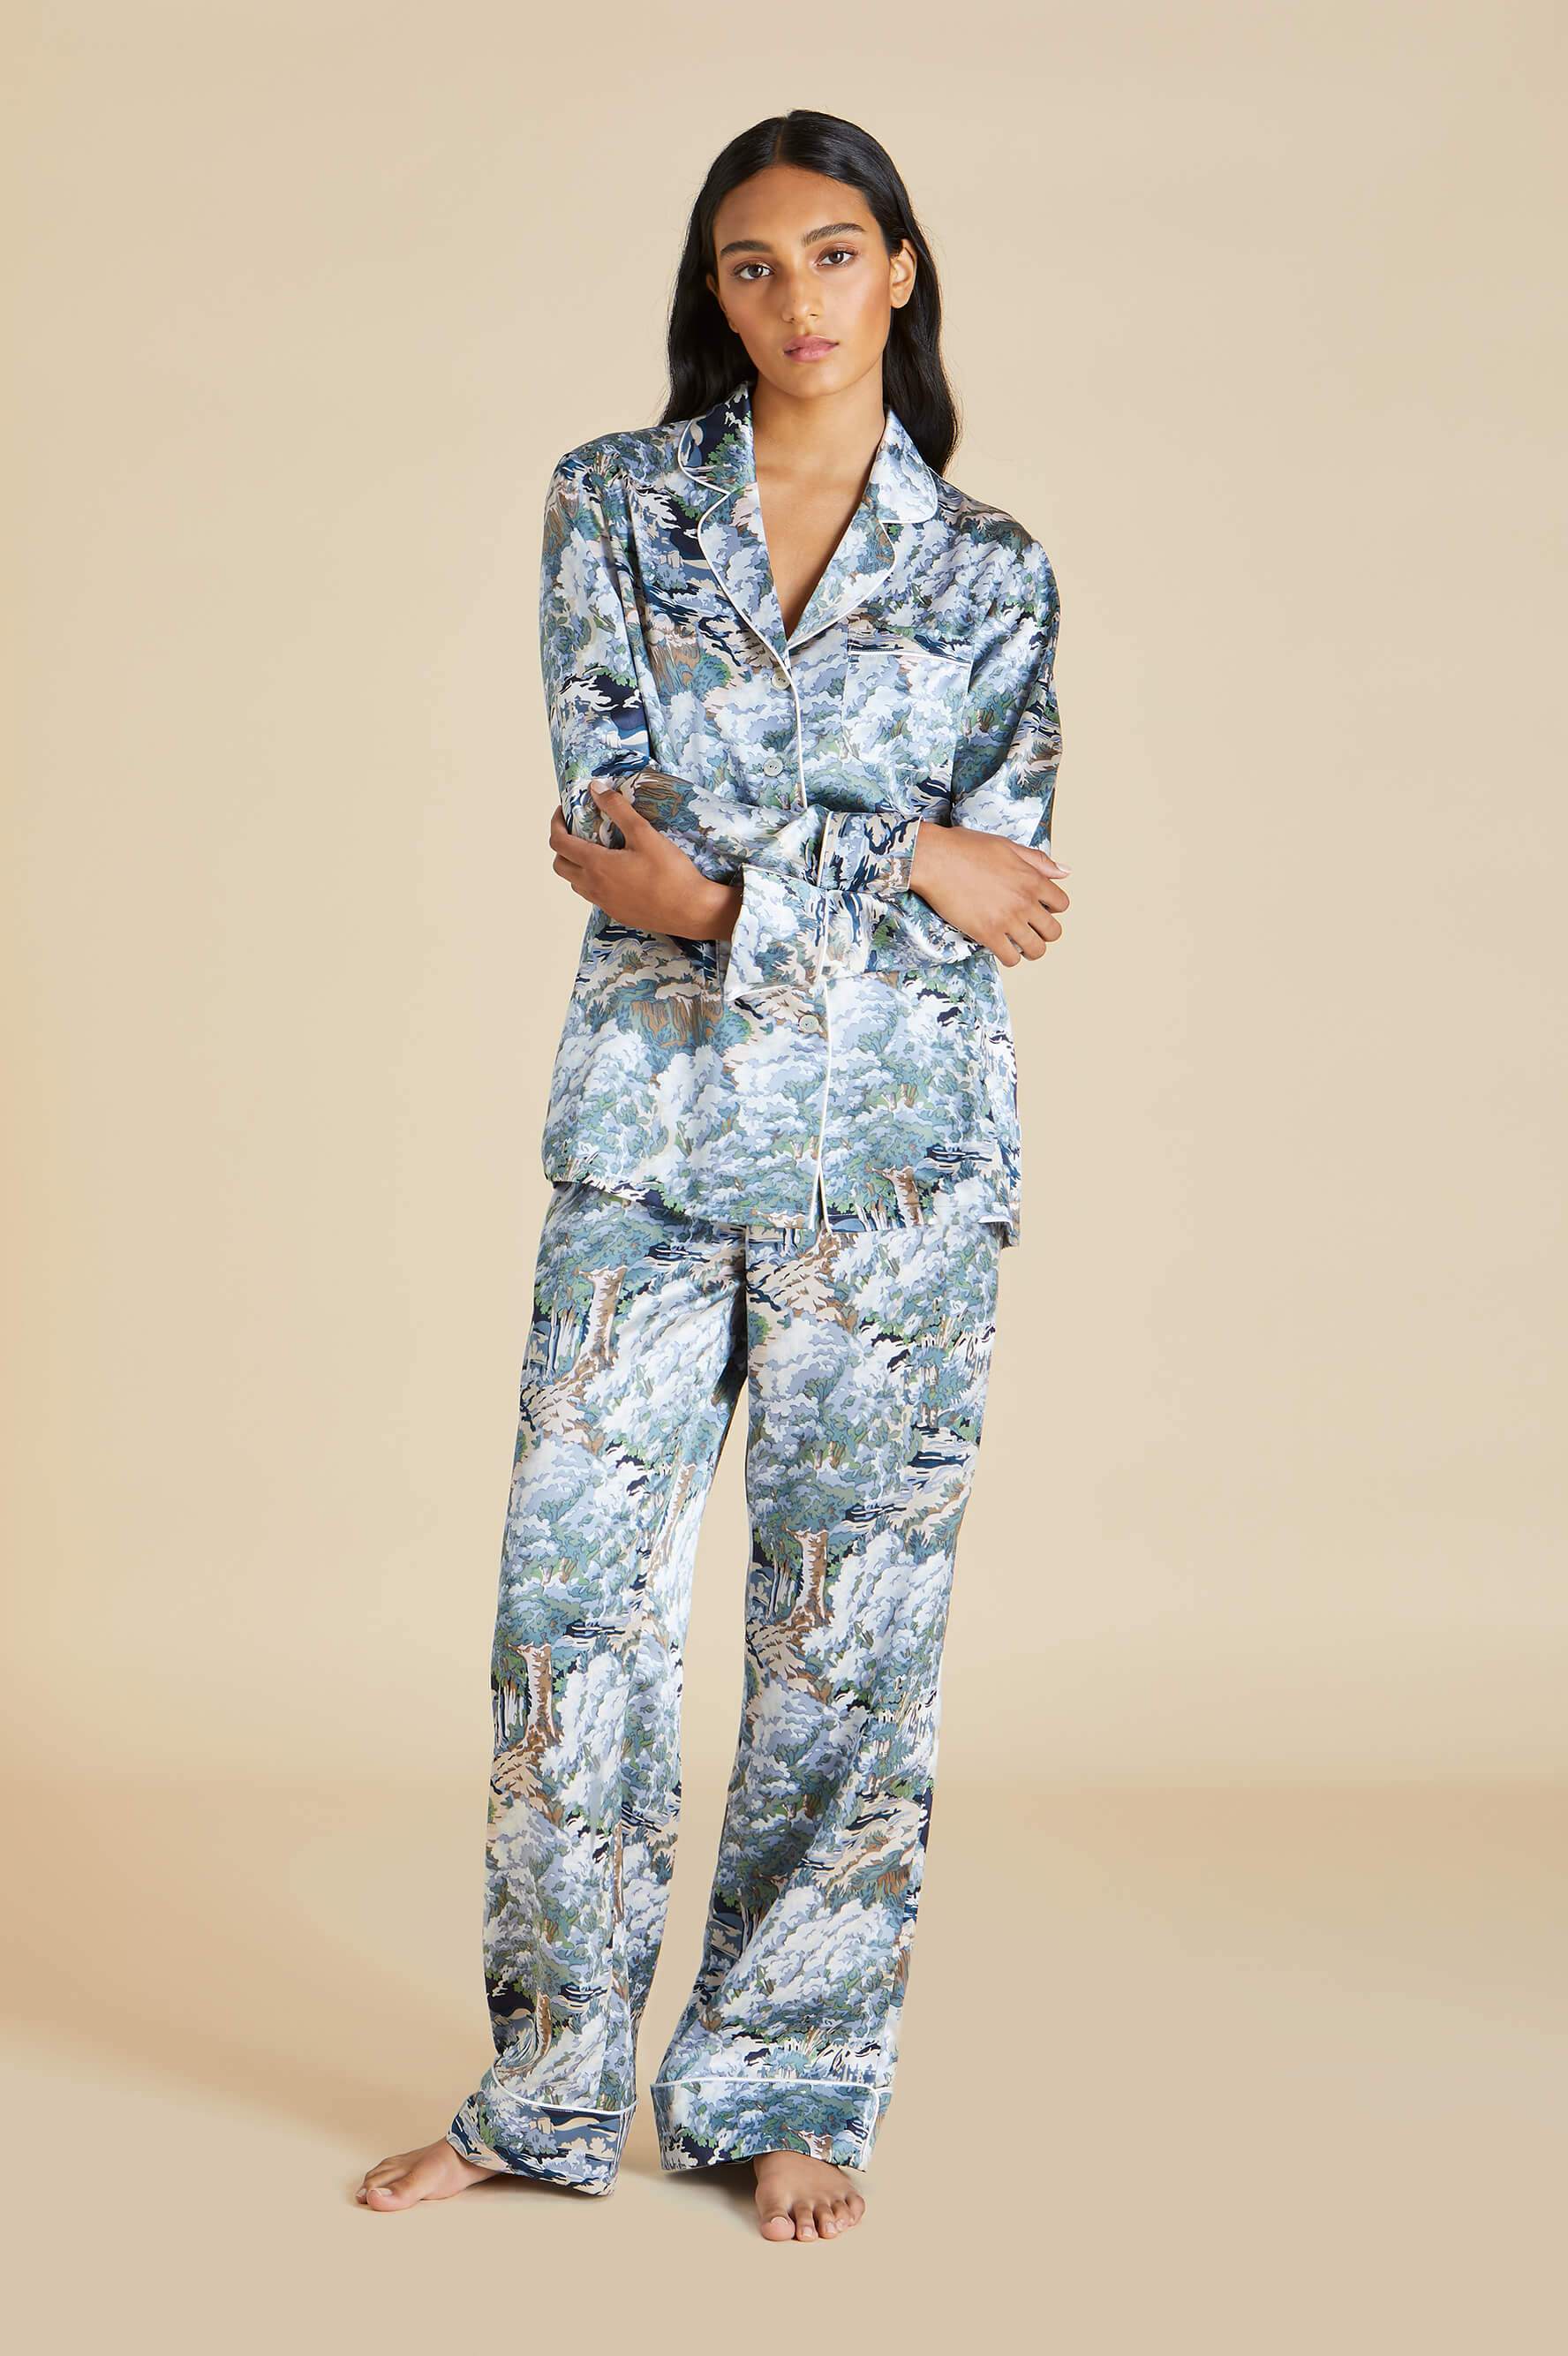 20 Pairs of Pajamas That Can Double As Outerwear | The Lingerie Addict